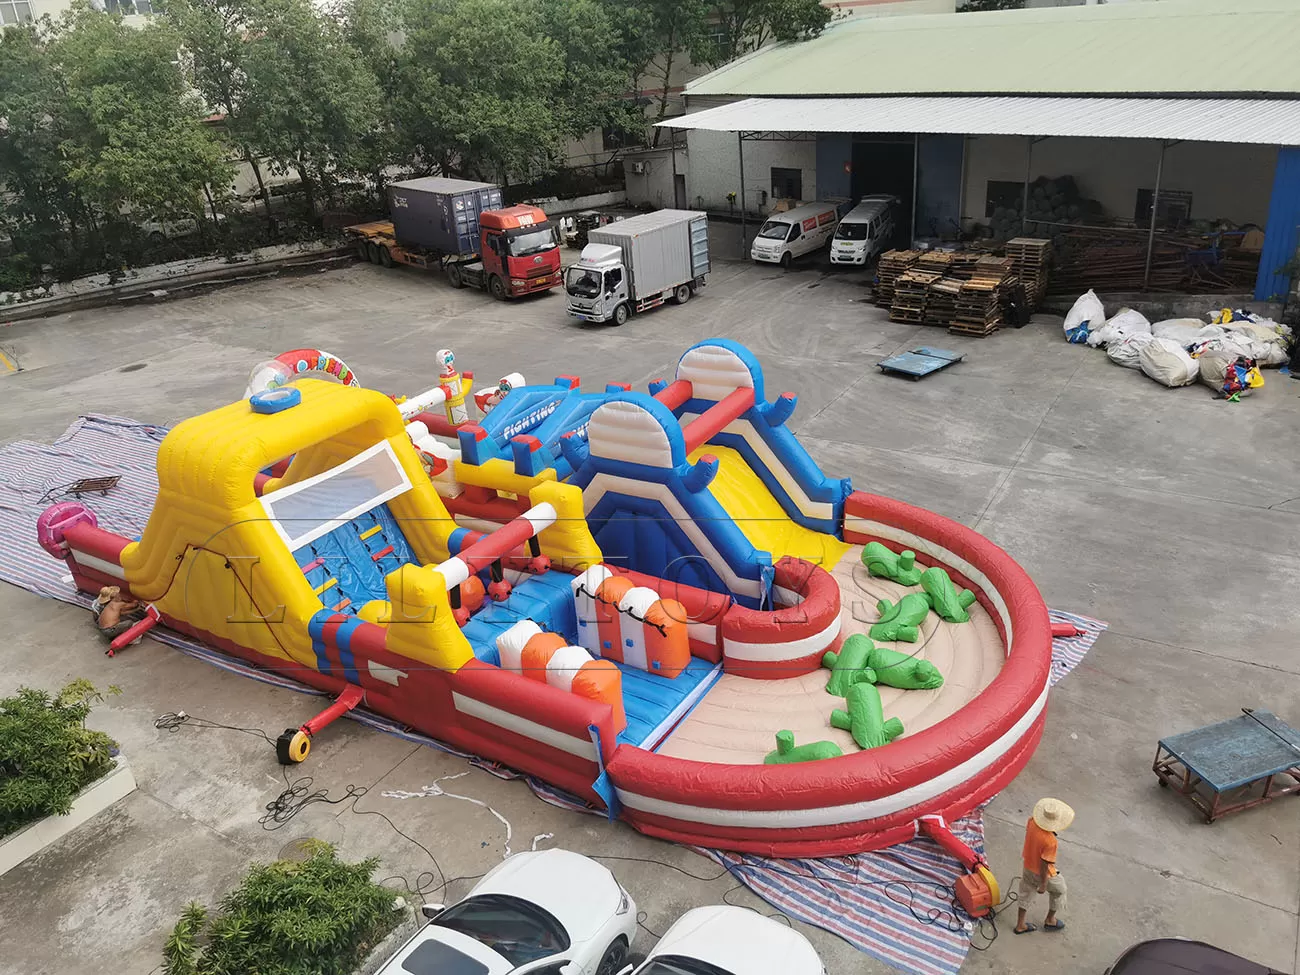 New giant obstacle course inflatable for rentals